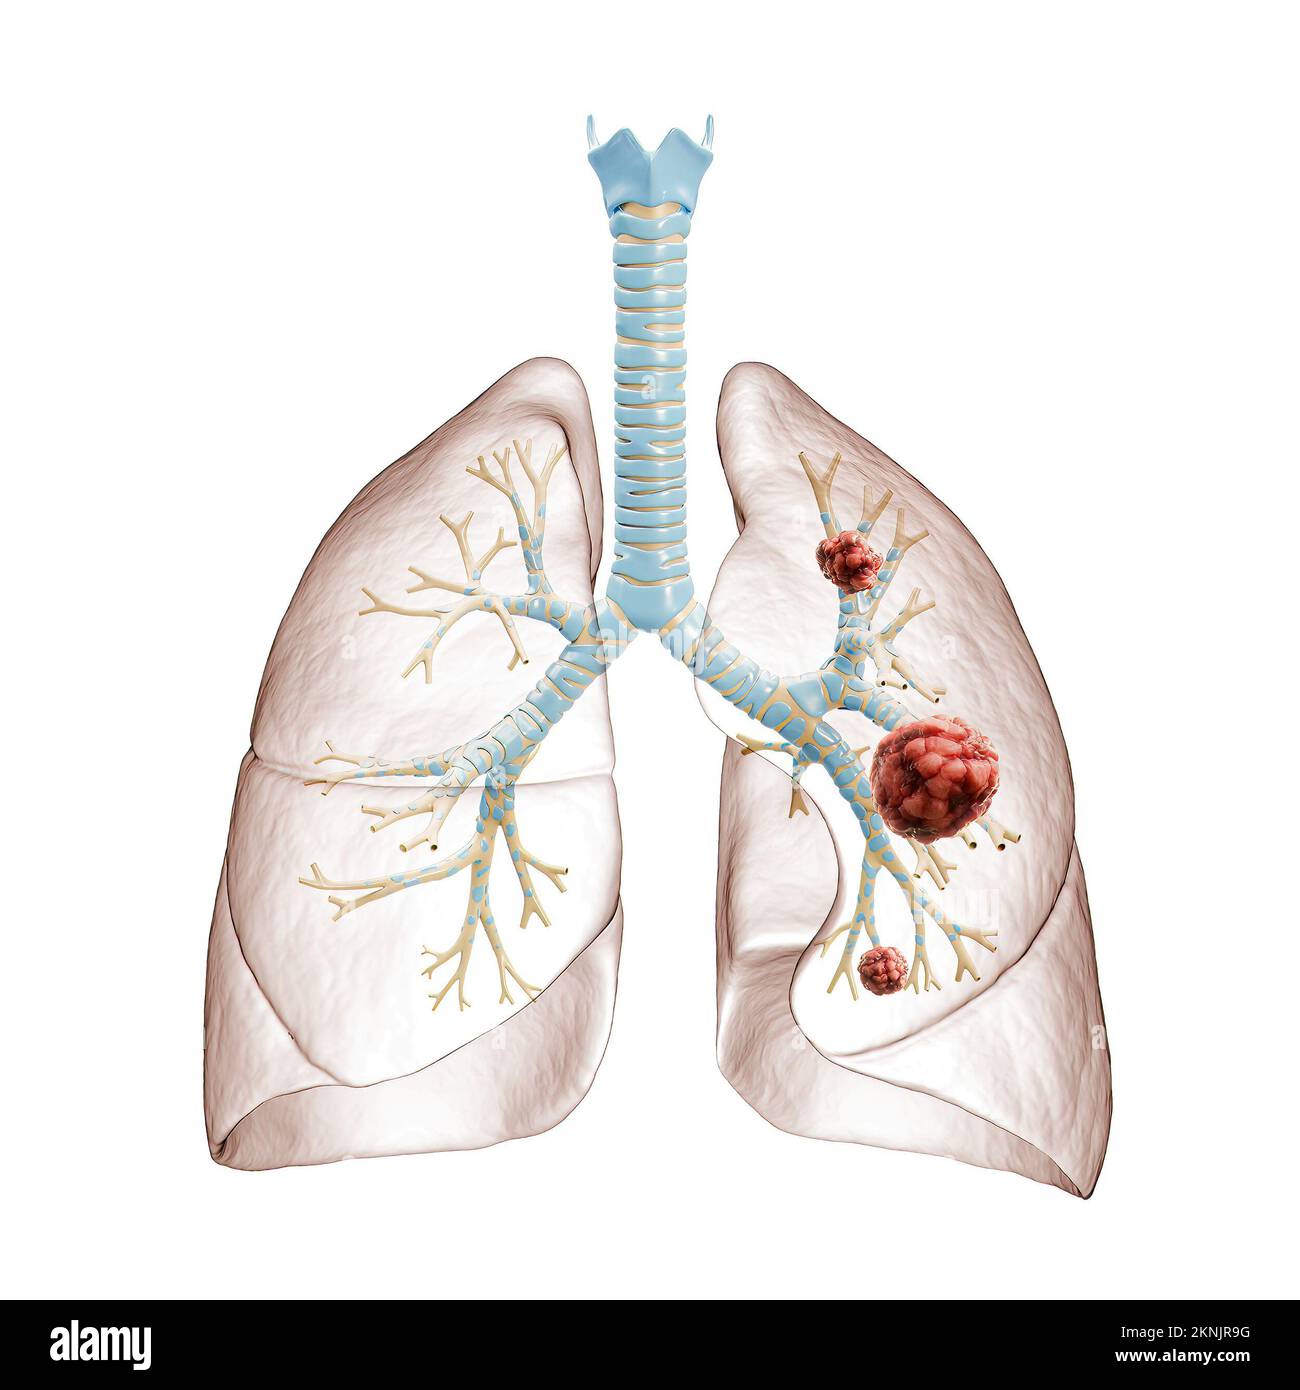 Lung cancer or carcinoma 3D rendering illustration. Bronchial tree and lungs infected by cancer cells on white background. Medical, healthcare, oncolo Stock Photo